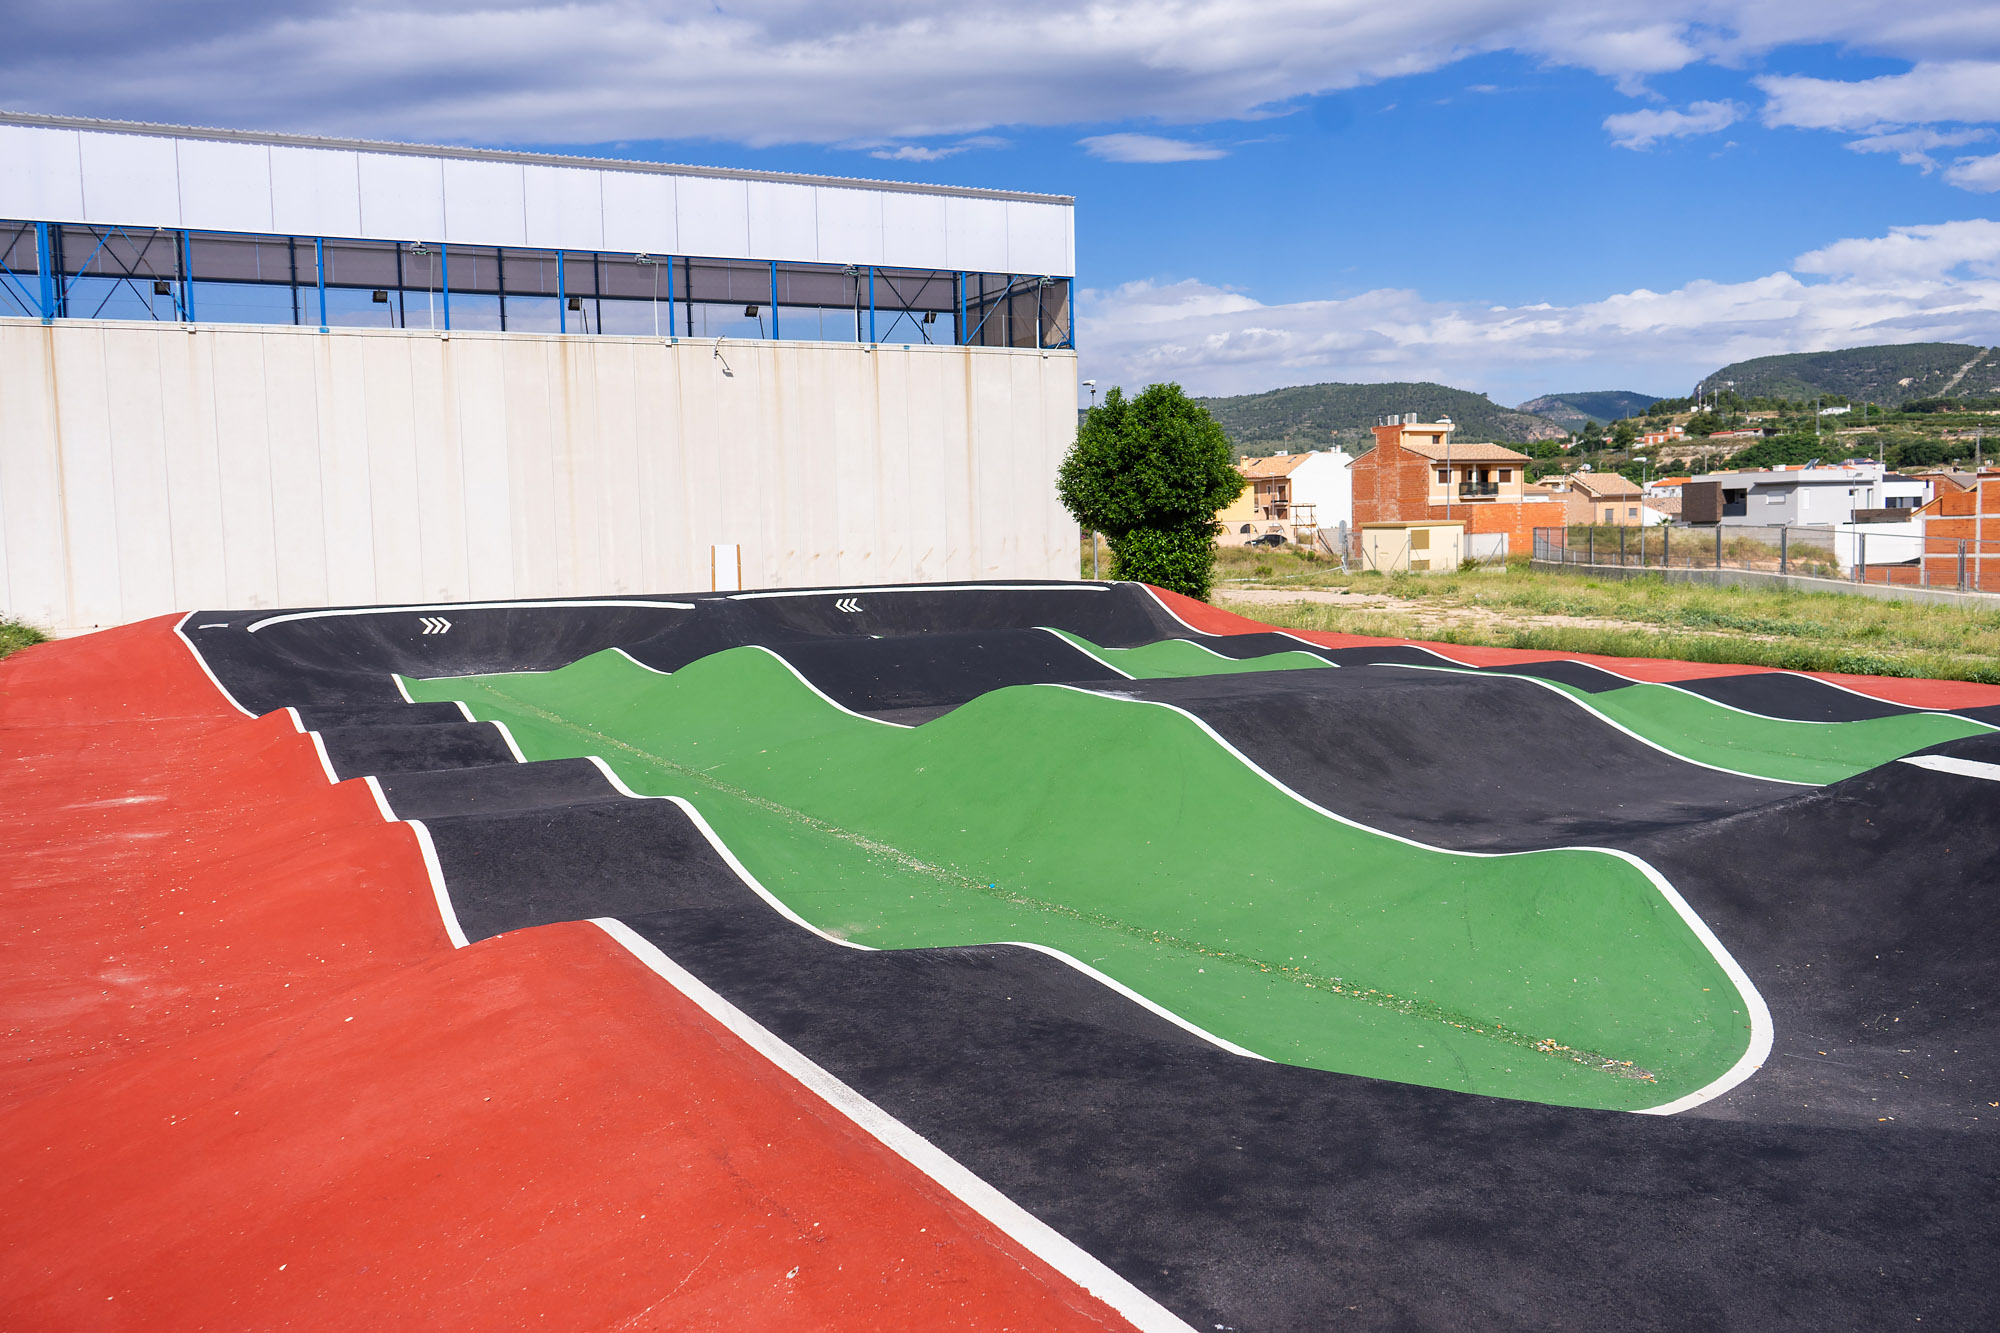 Outdoor skate park in province of Valencia